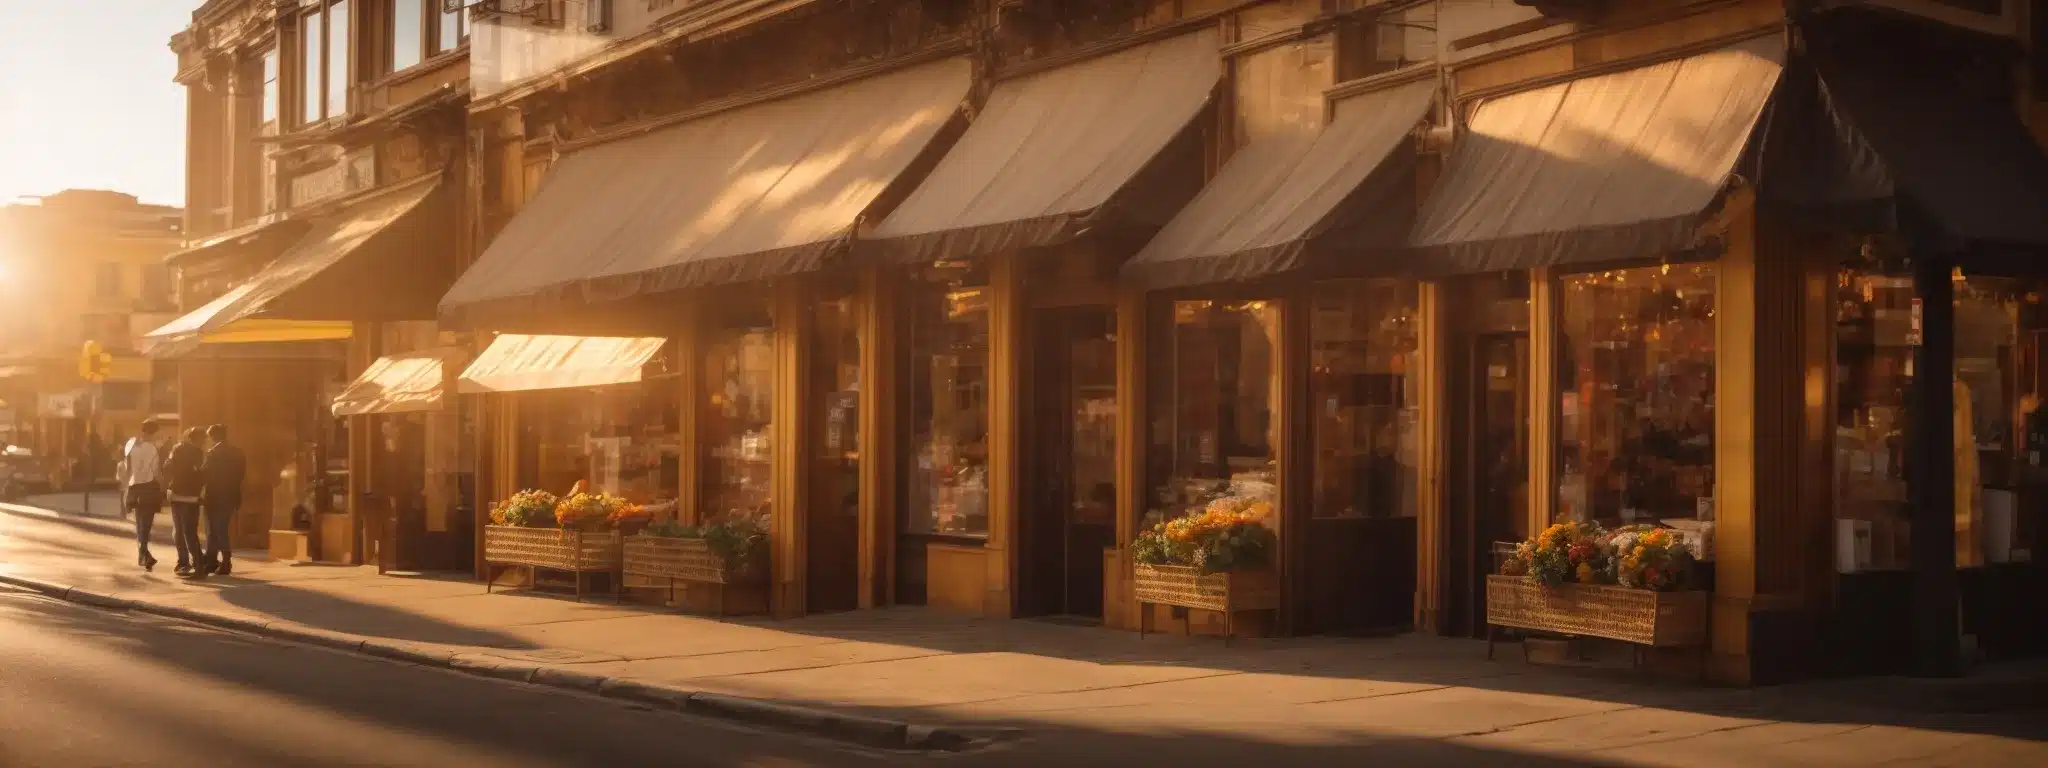 A Storefront Gleaming Under The Golden Hour Sun, Inviting Online Passersby With Its Warm Glow And Display.